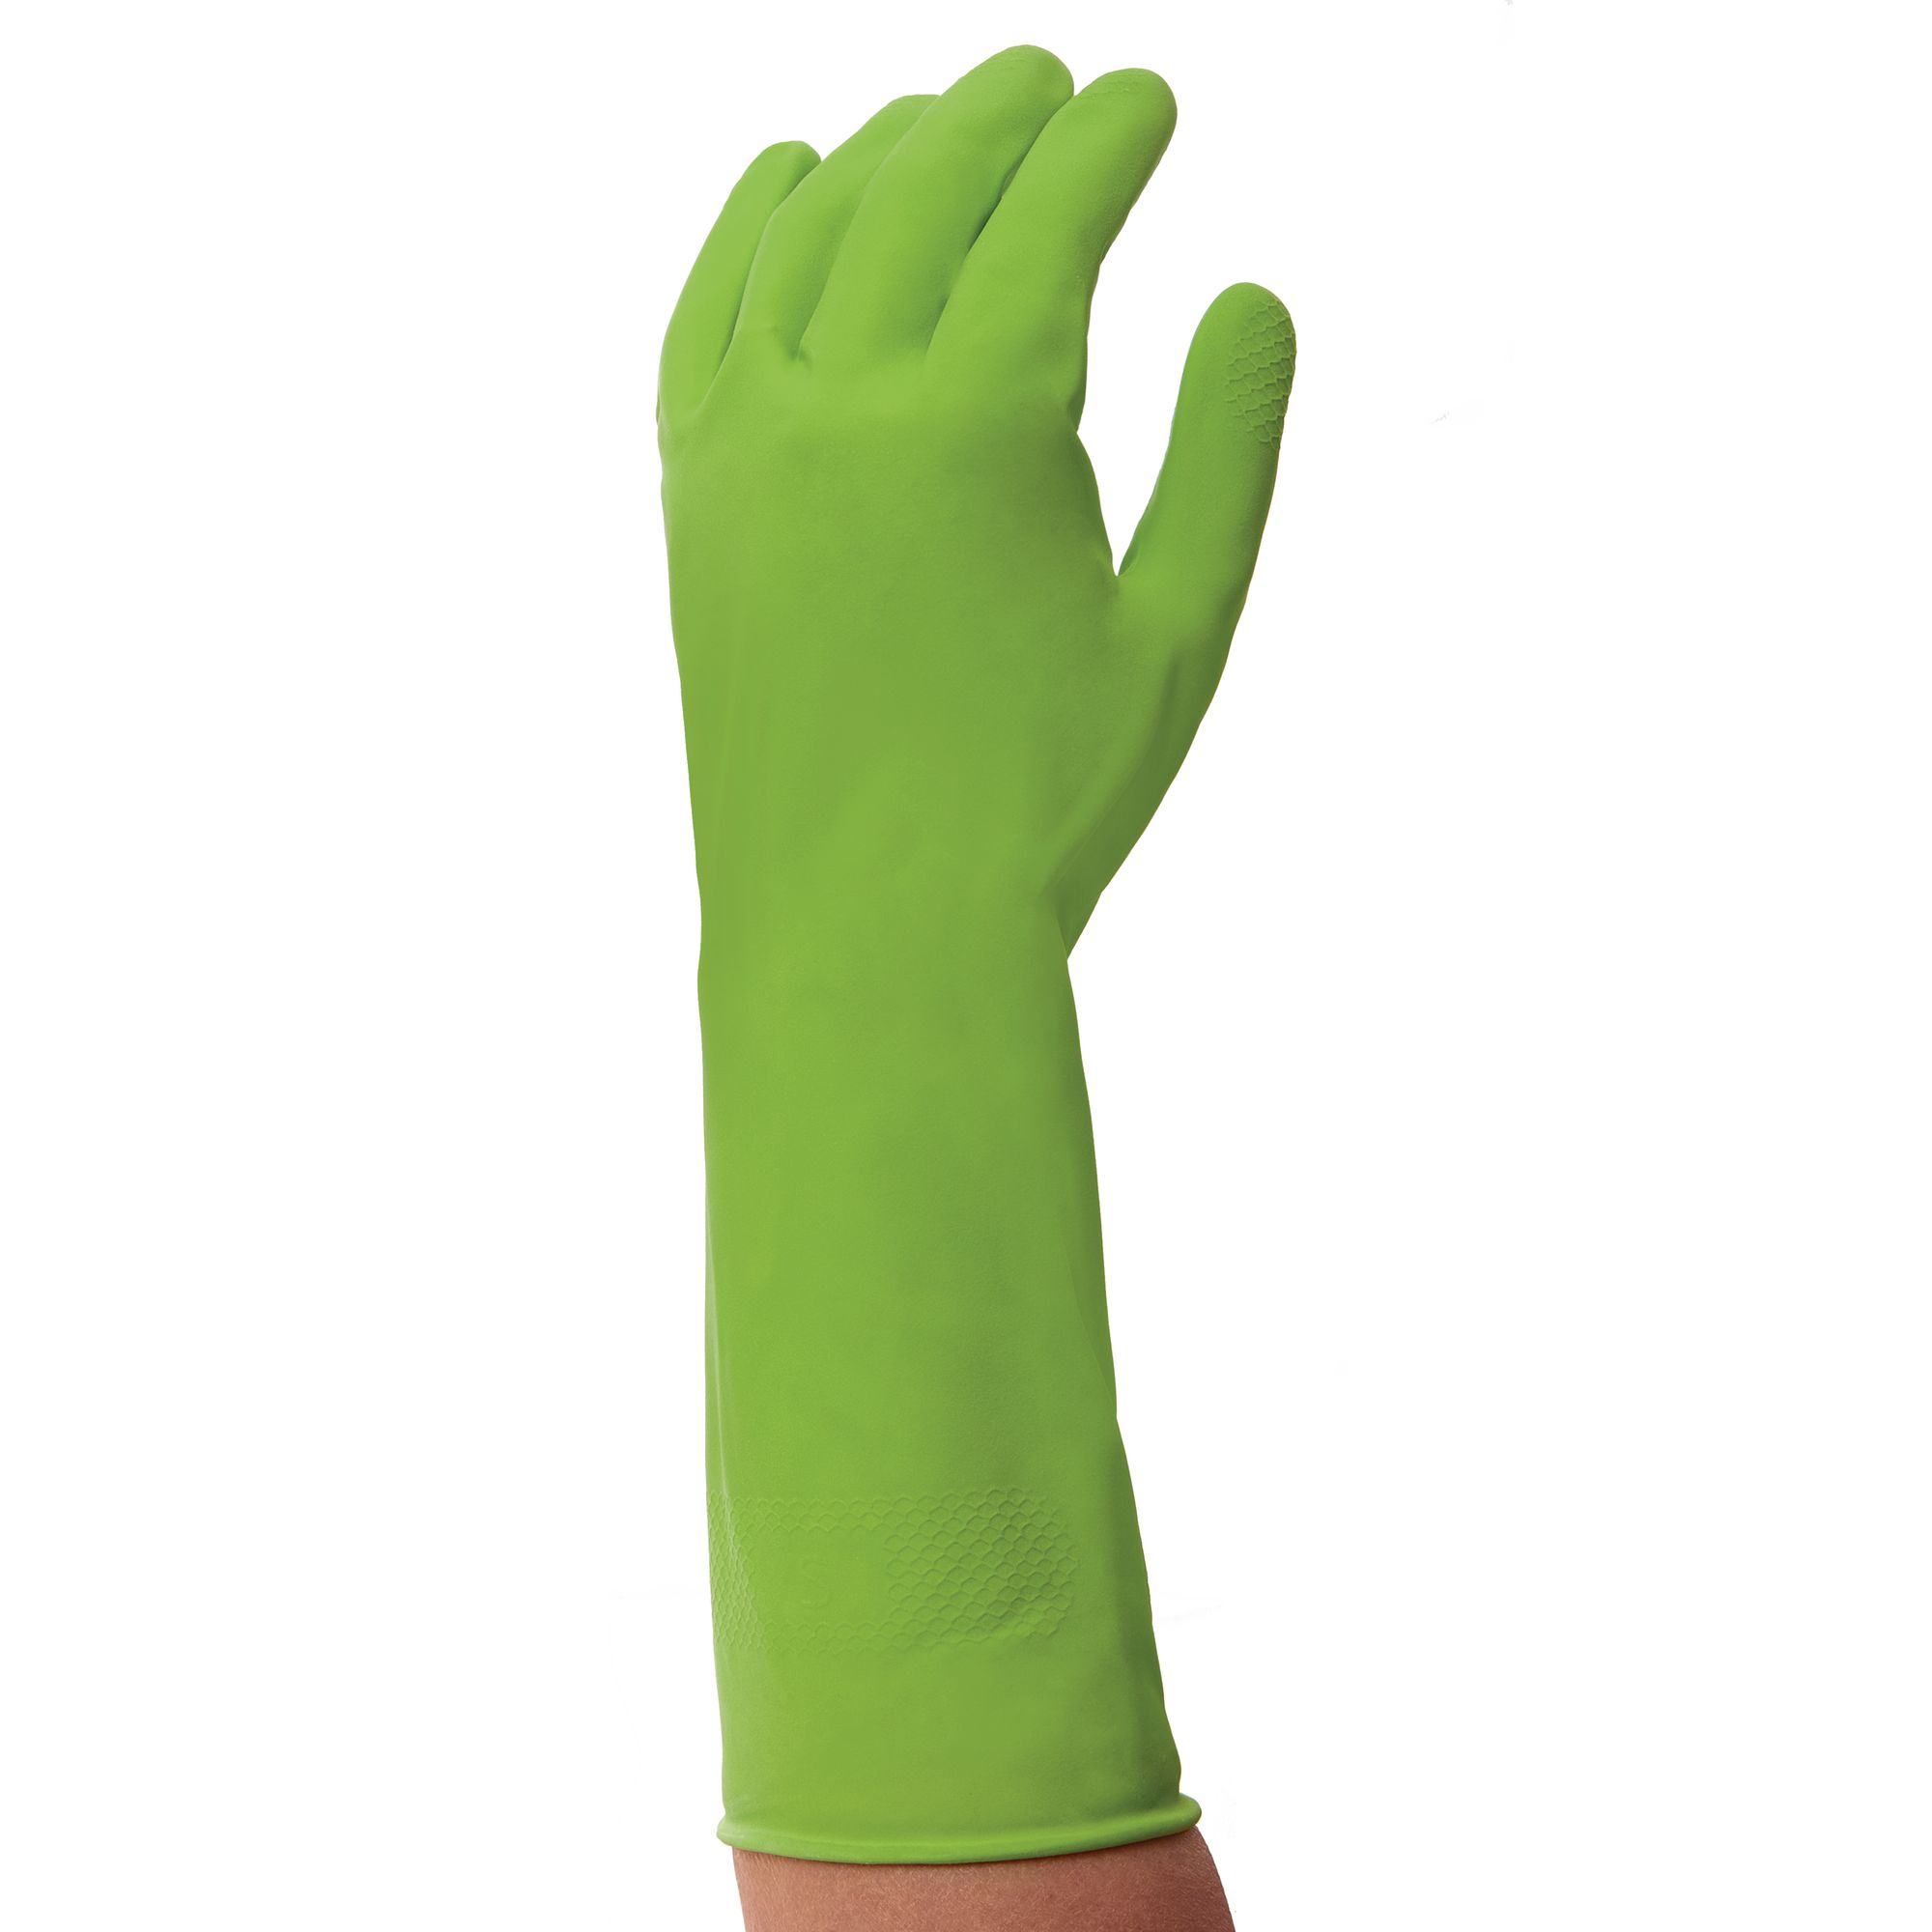 H-hold Rubber Gloves Grn Small